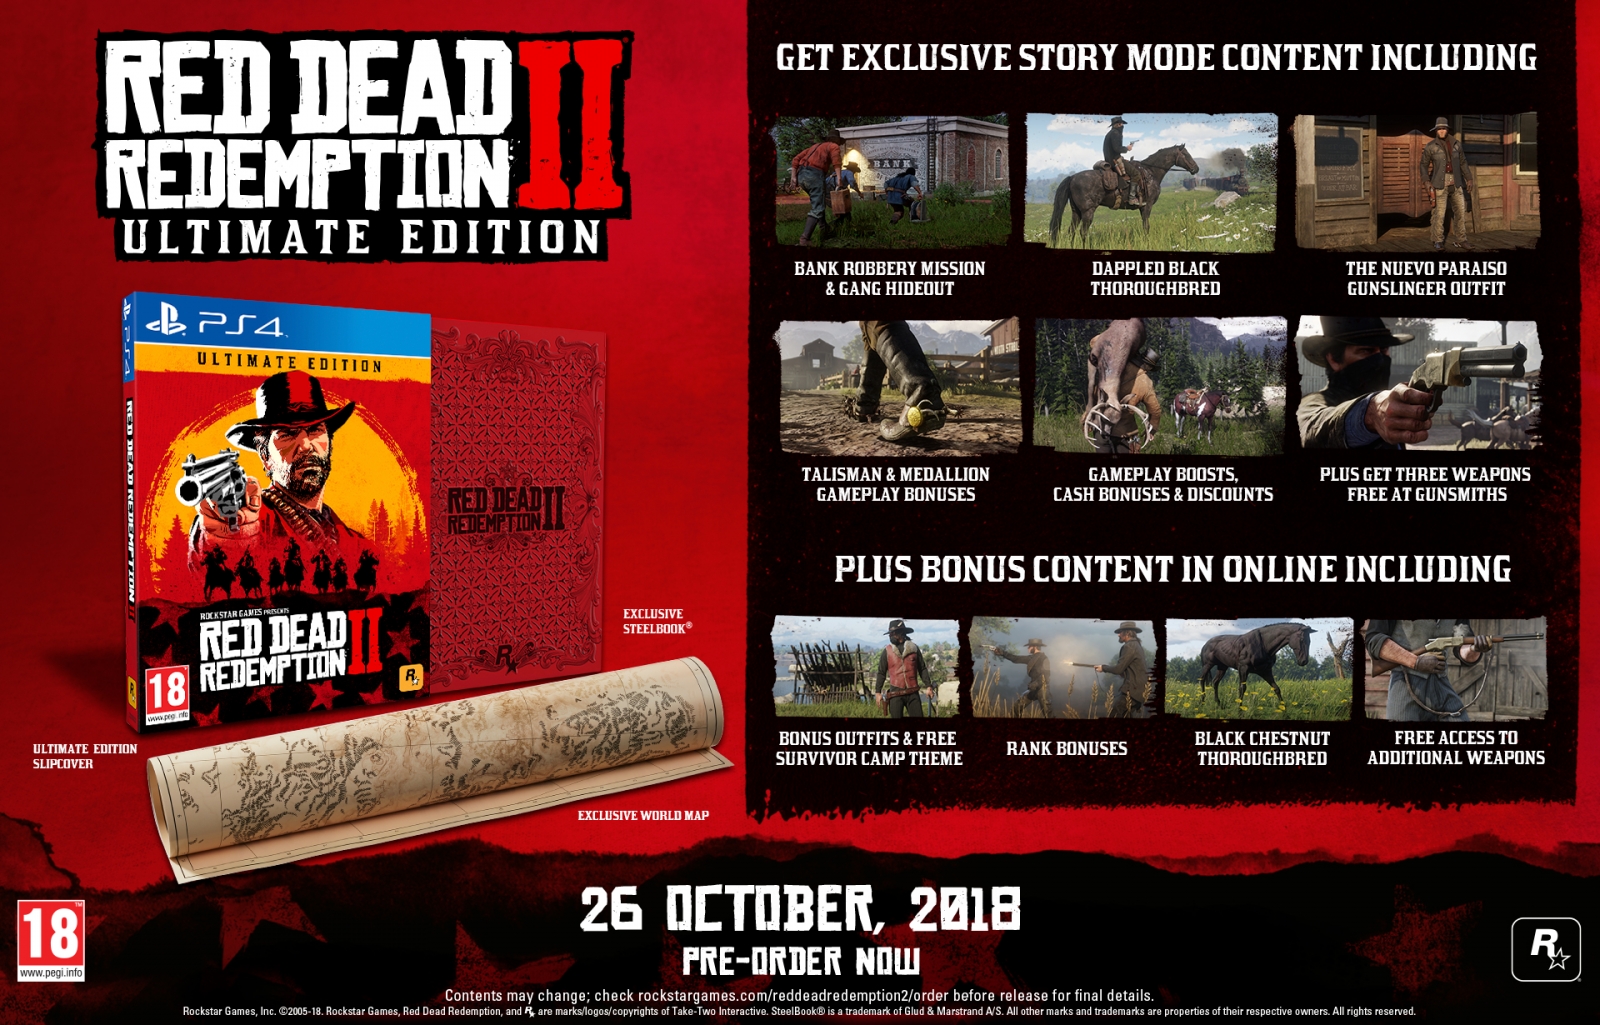 PS4 Red Dead Redemption 2 Ultimate Edition